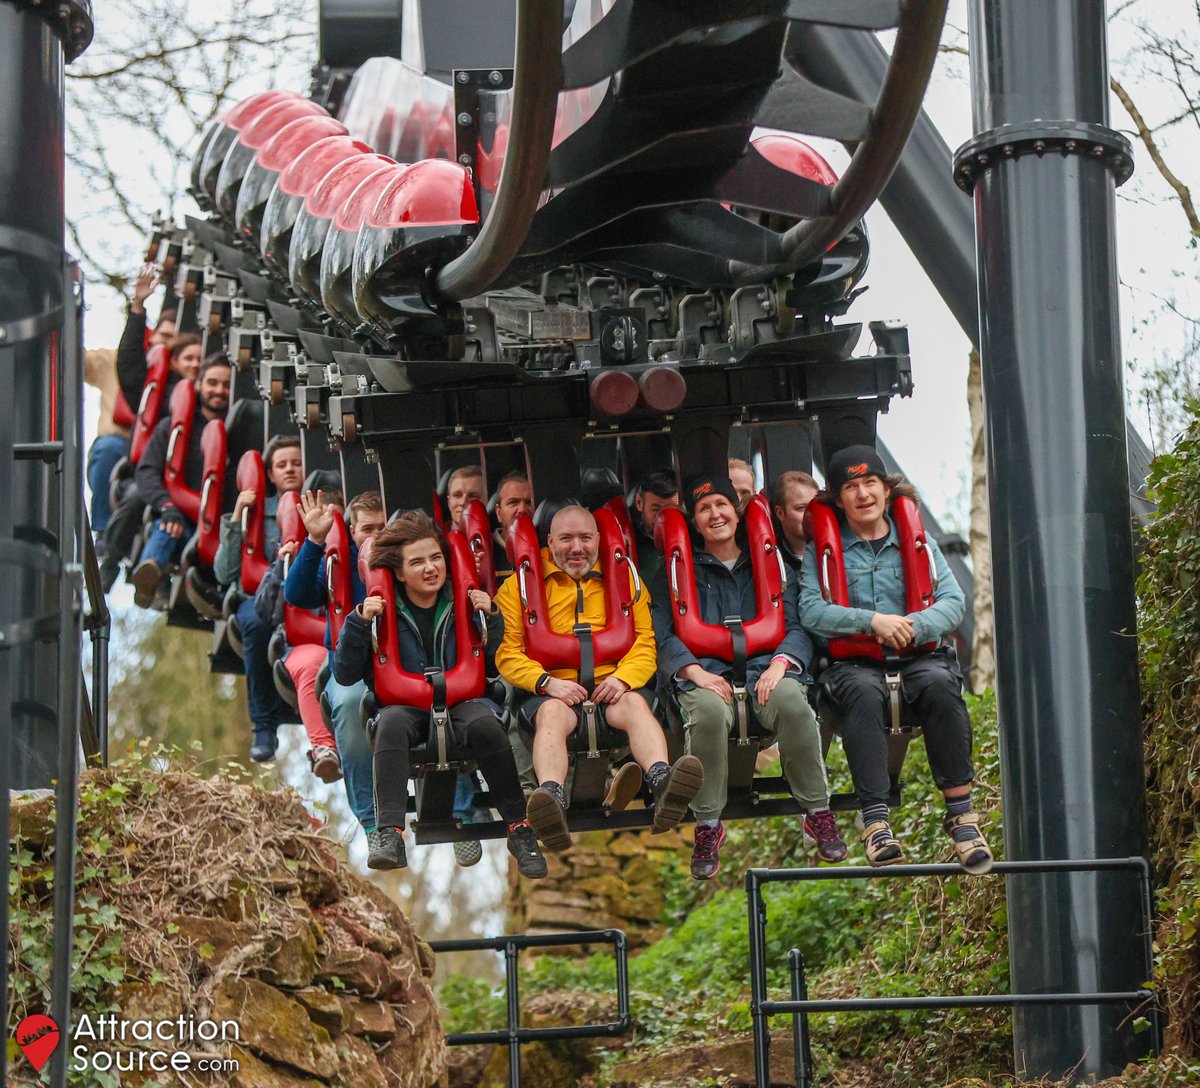 Thanks to all those who attended @TowersTimes' Twisted Vengeance at @altontowers on Saturday! The full event gallery is now available, so head over to the Events website to view. 👉 attractionsource.com/events/past-ev…